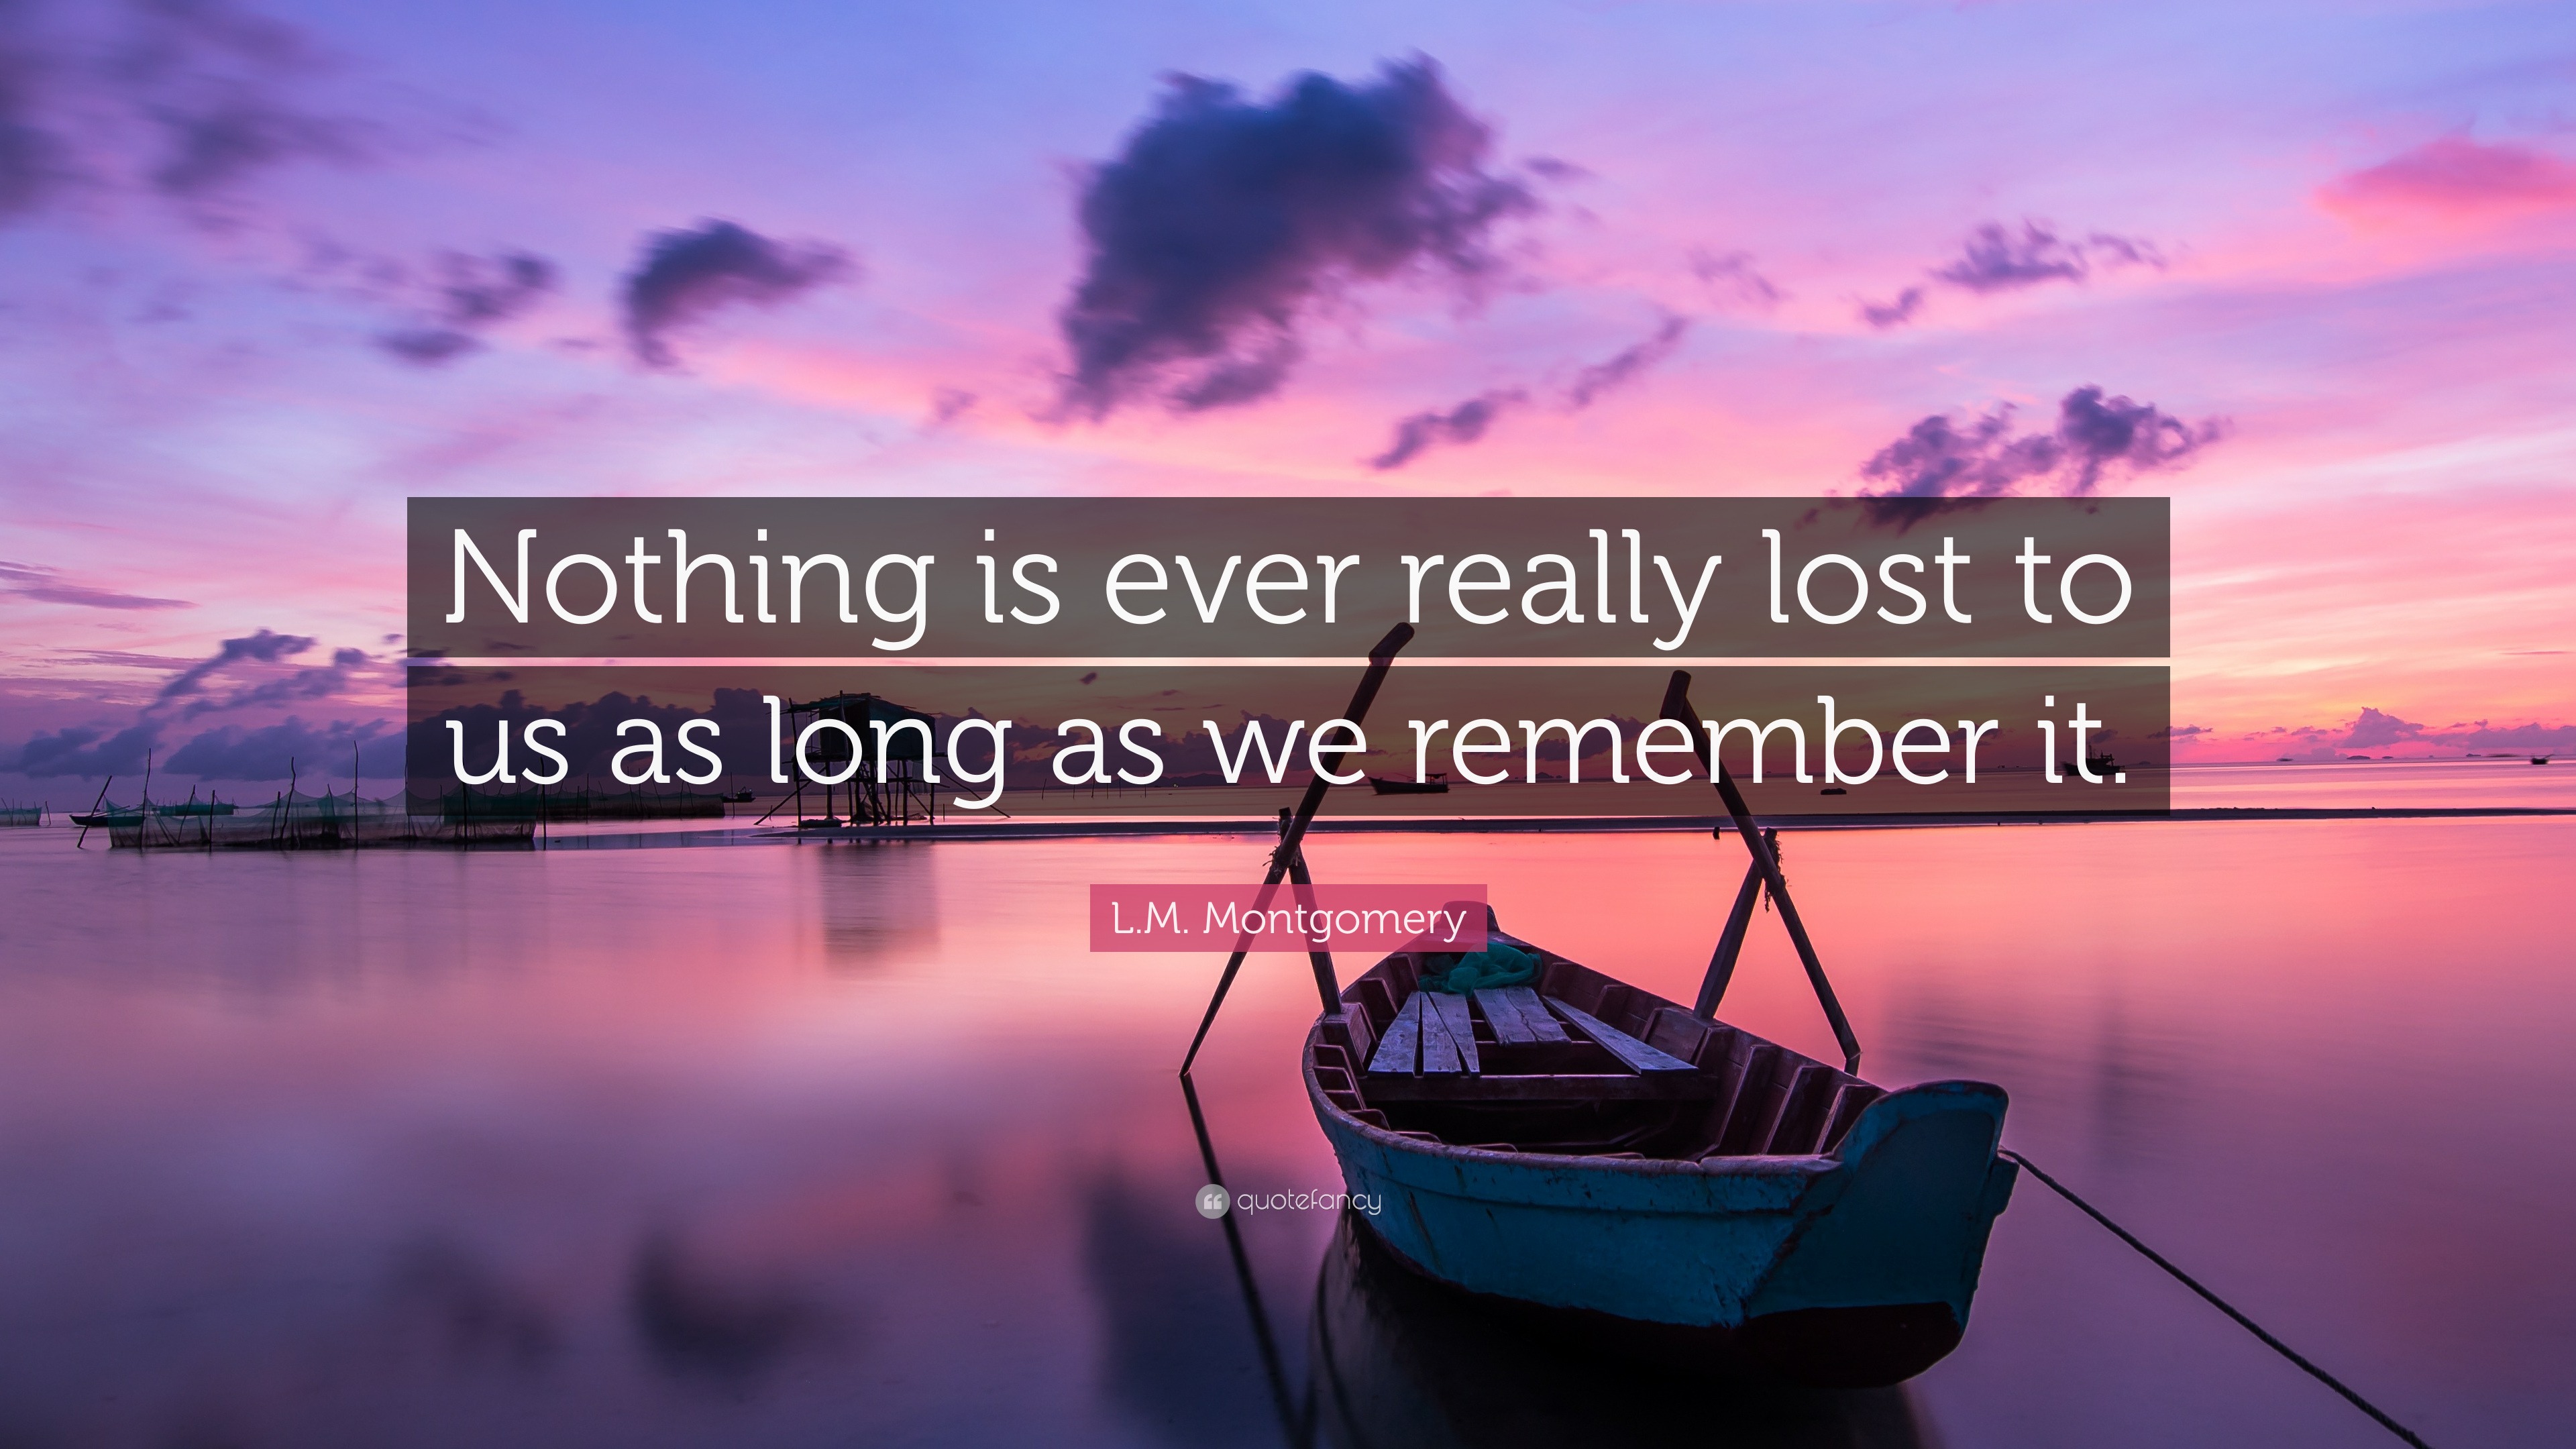 L.M. Montgomery Quote: "Nothing is ever really lost to us as long as we remember it." (12 ...